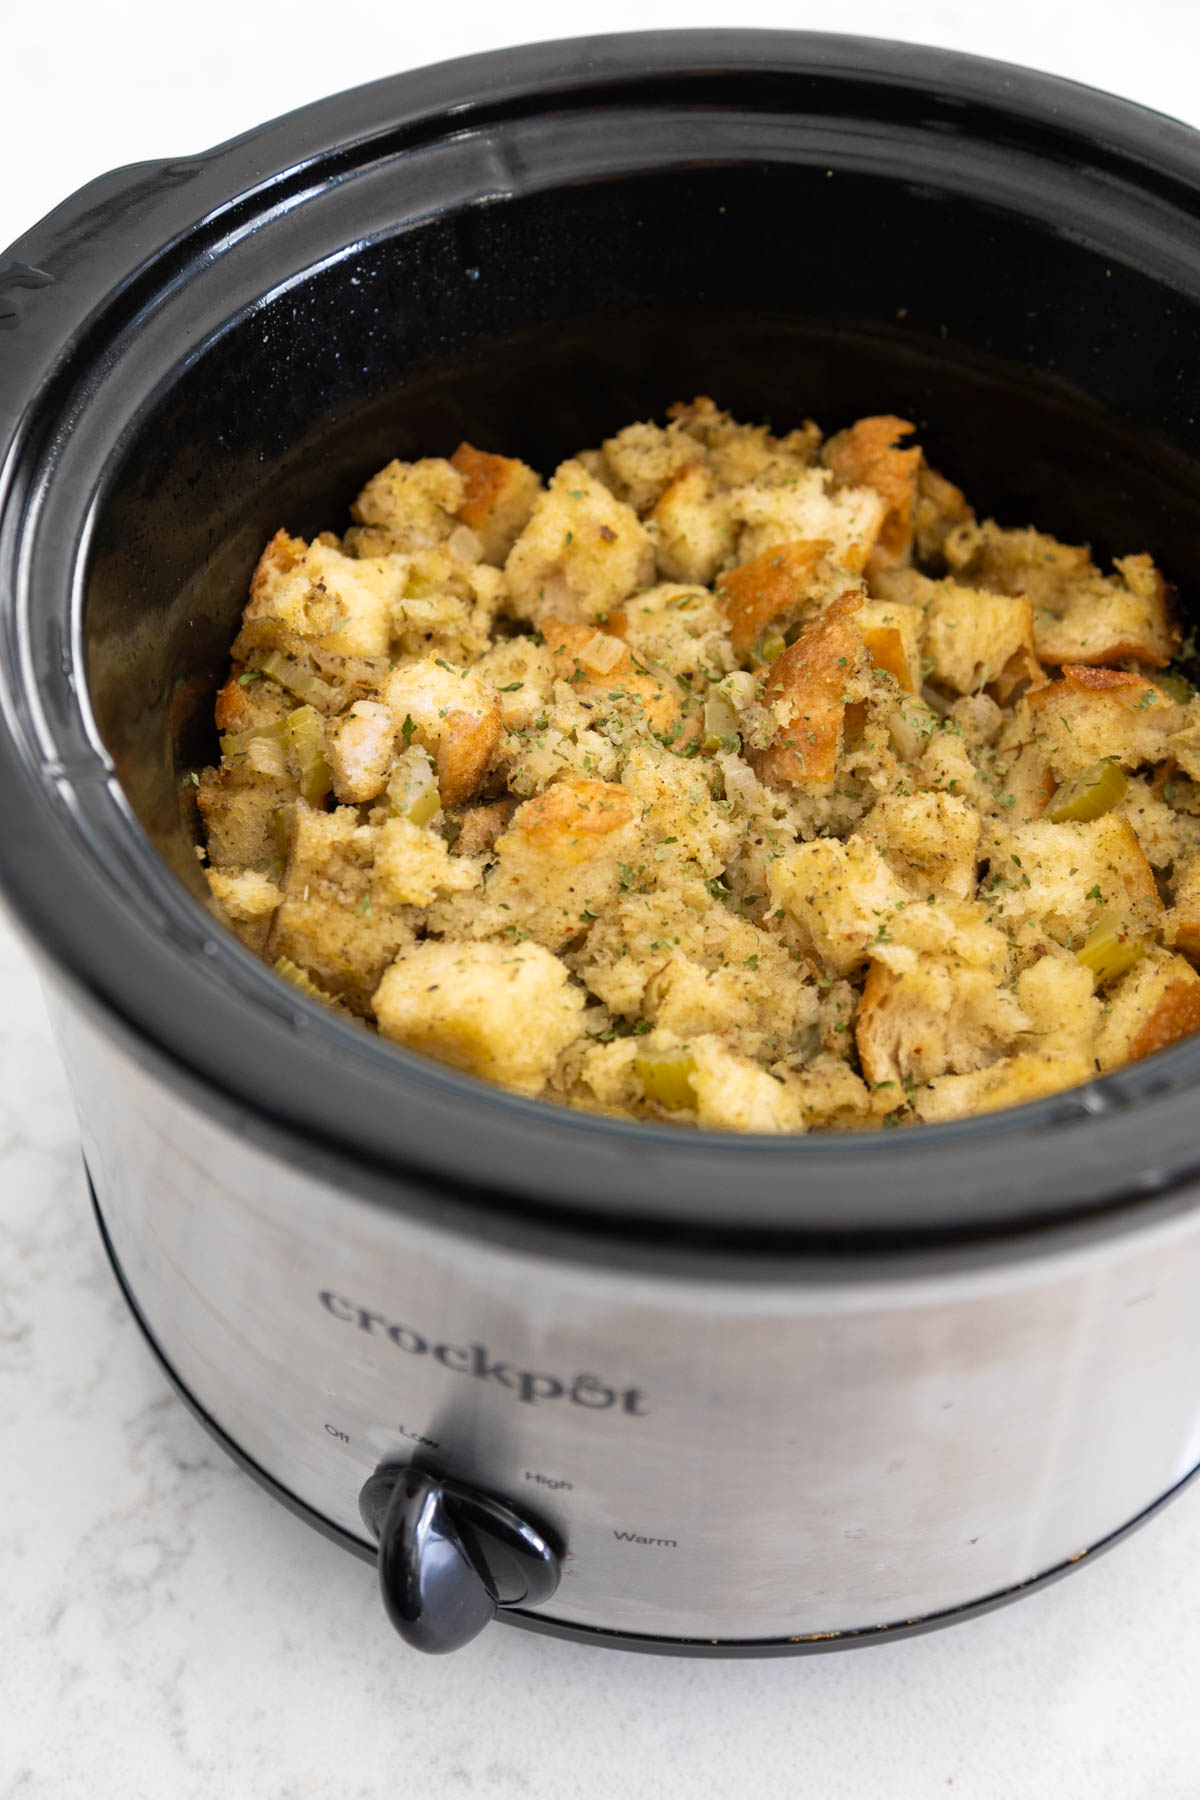 The finished stuffing is served right in the slowcooker.